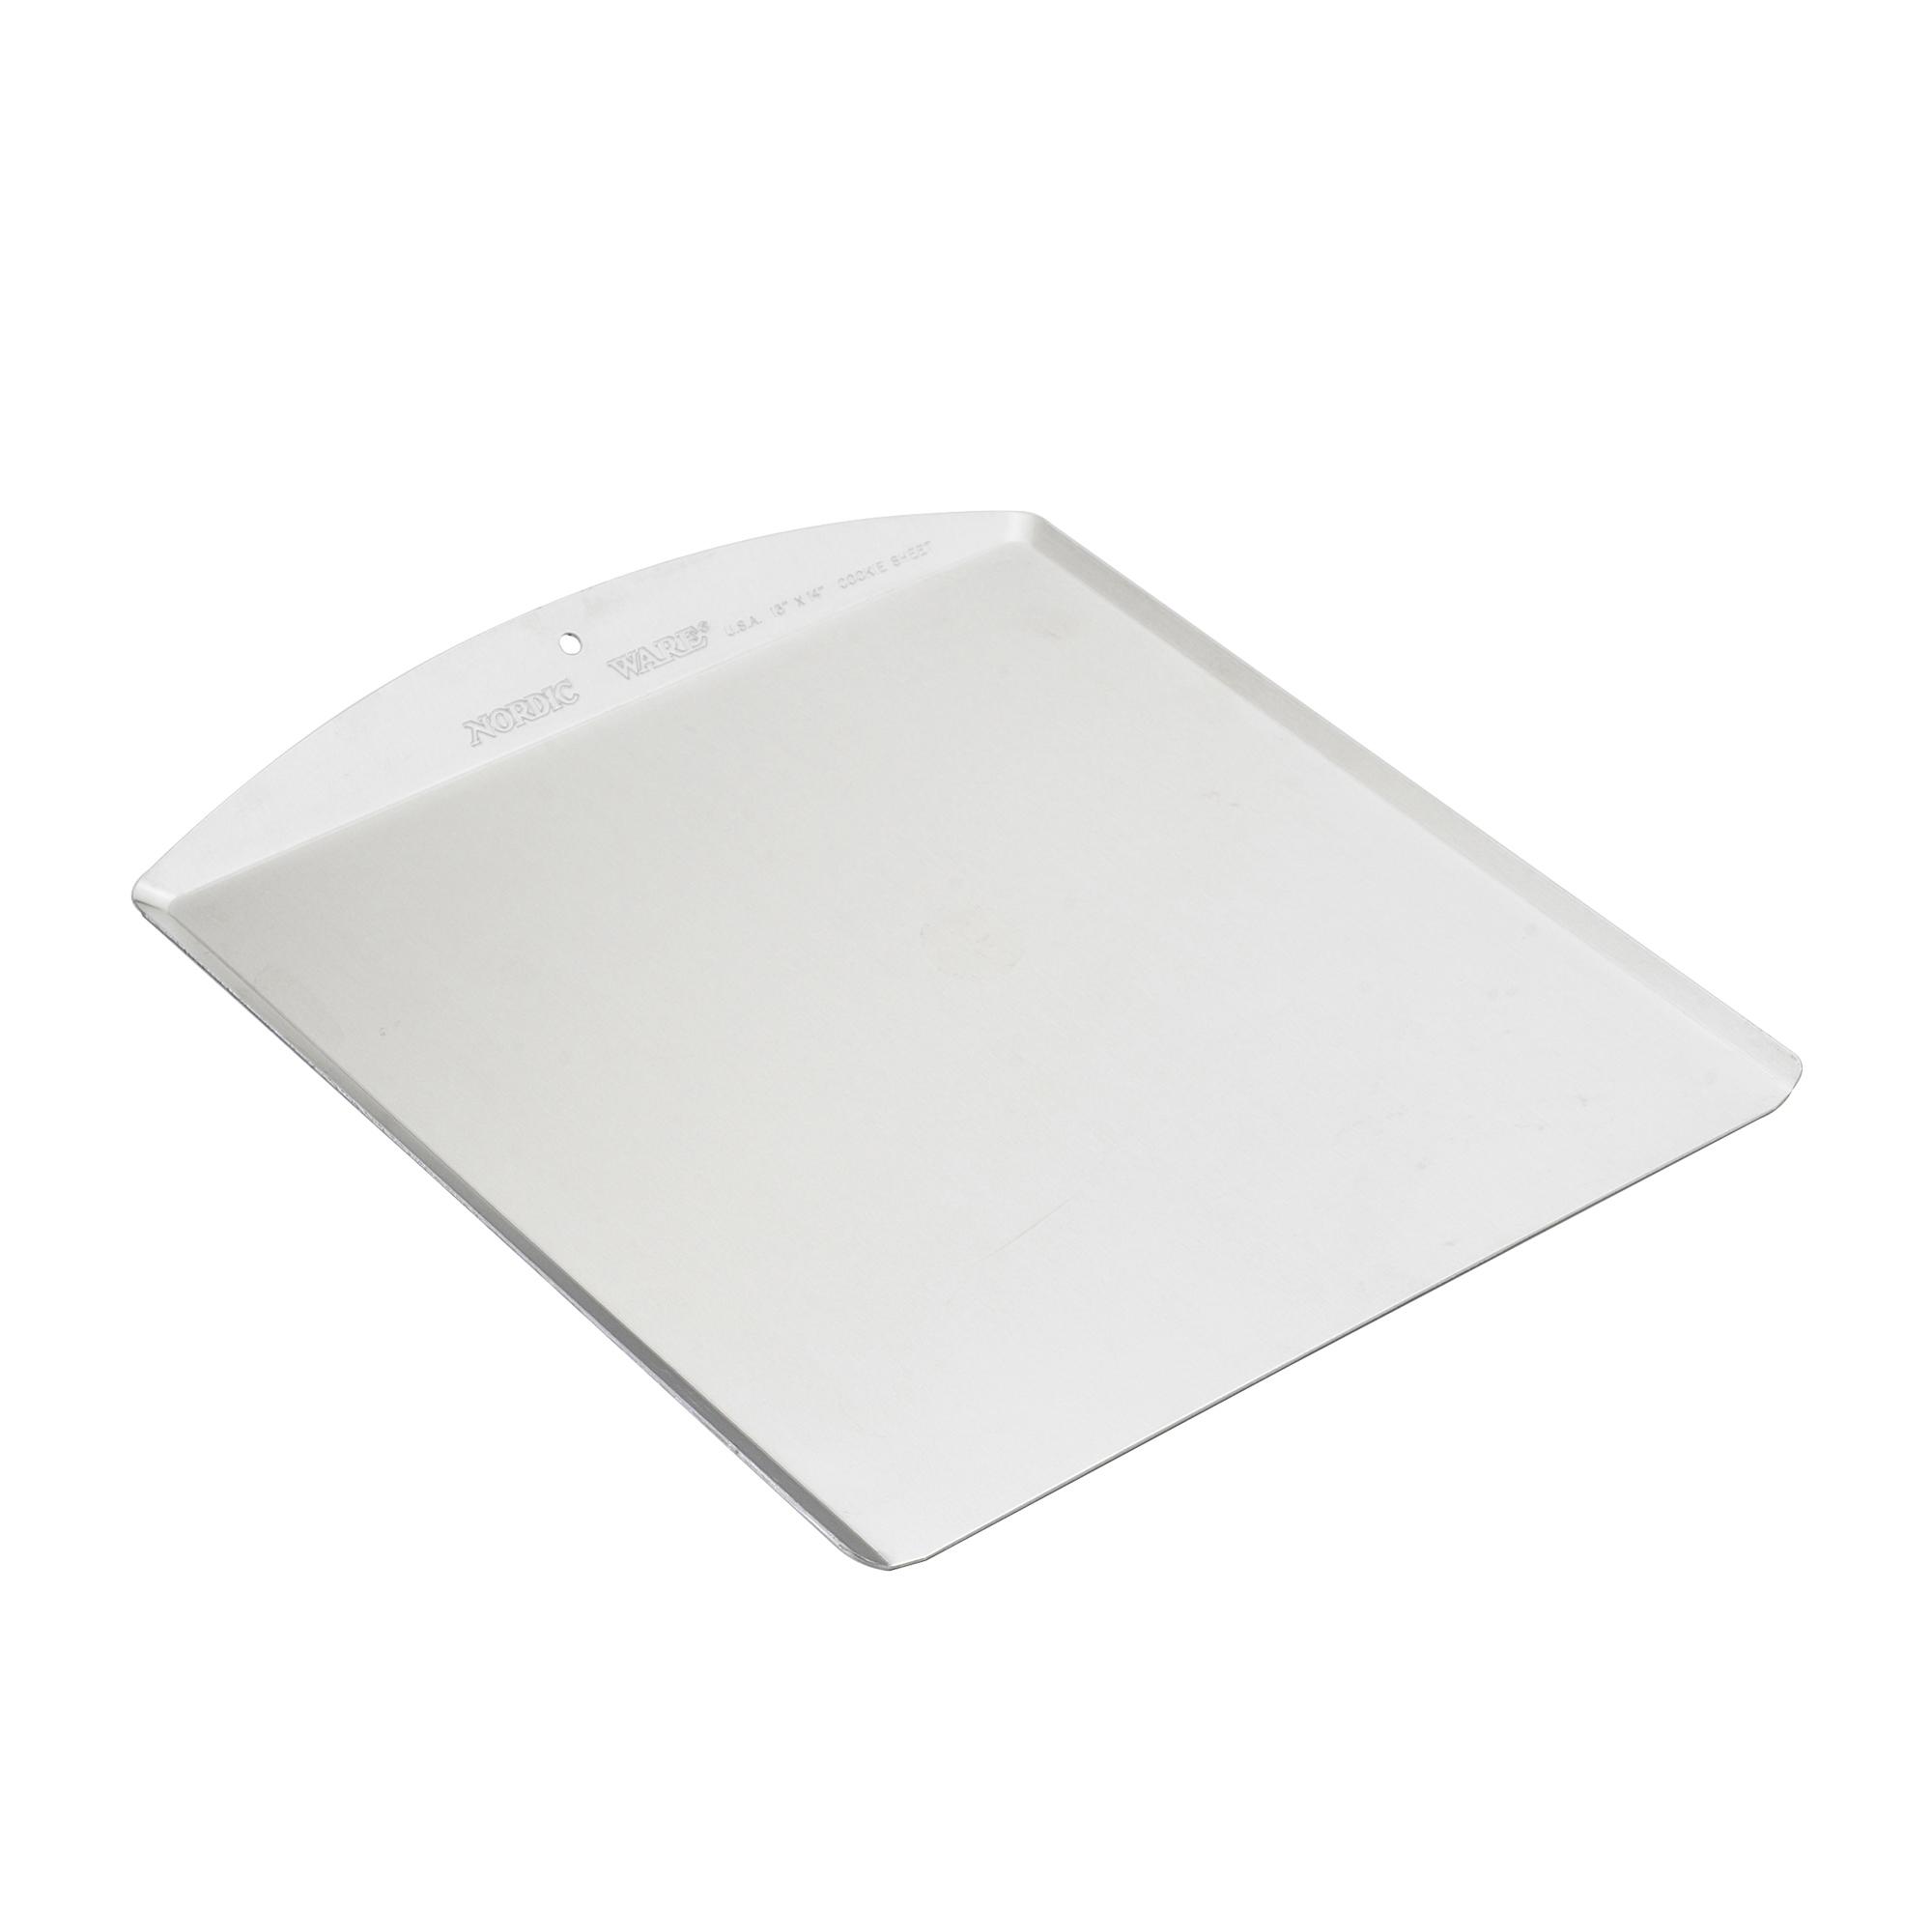 Nordic Ware Naturals Classic Cookie Sheet 40x35.5cm Image 1